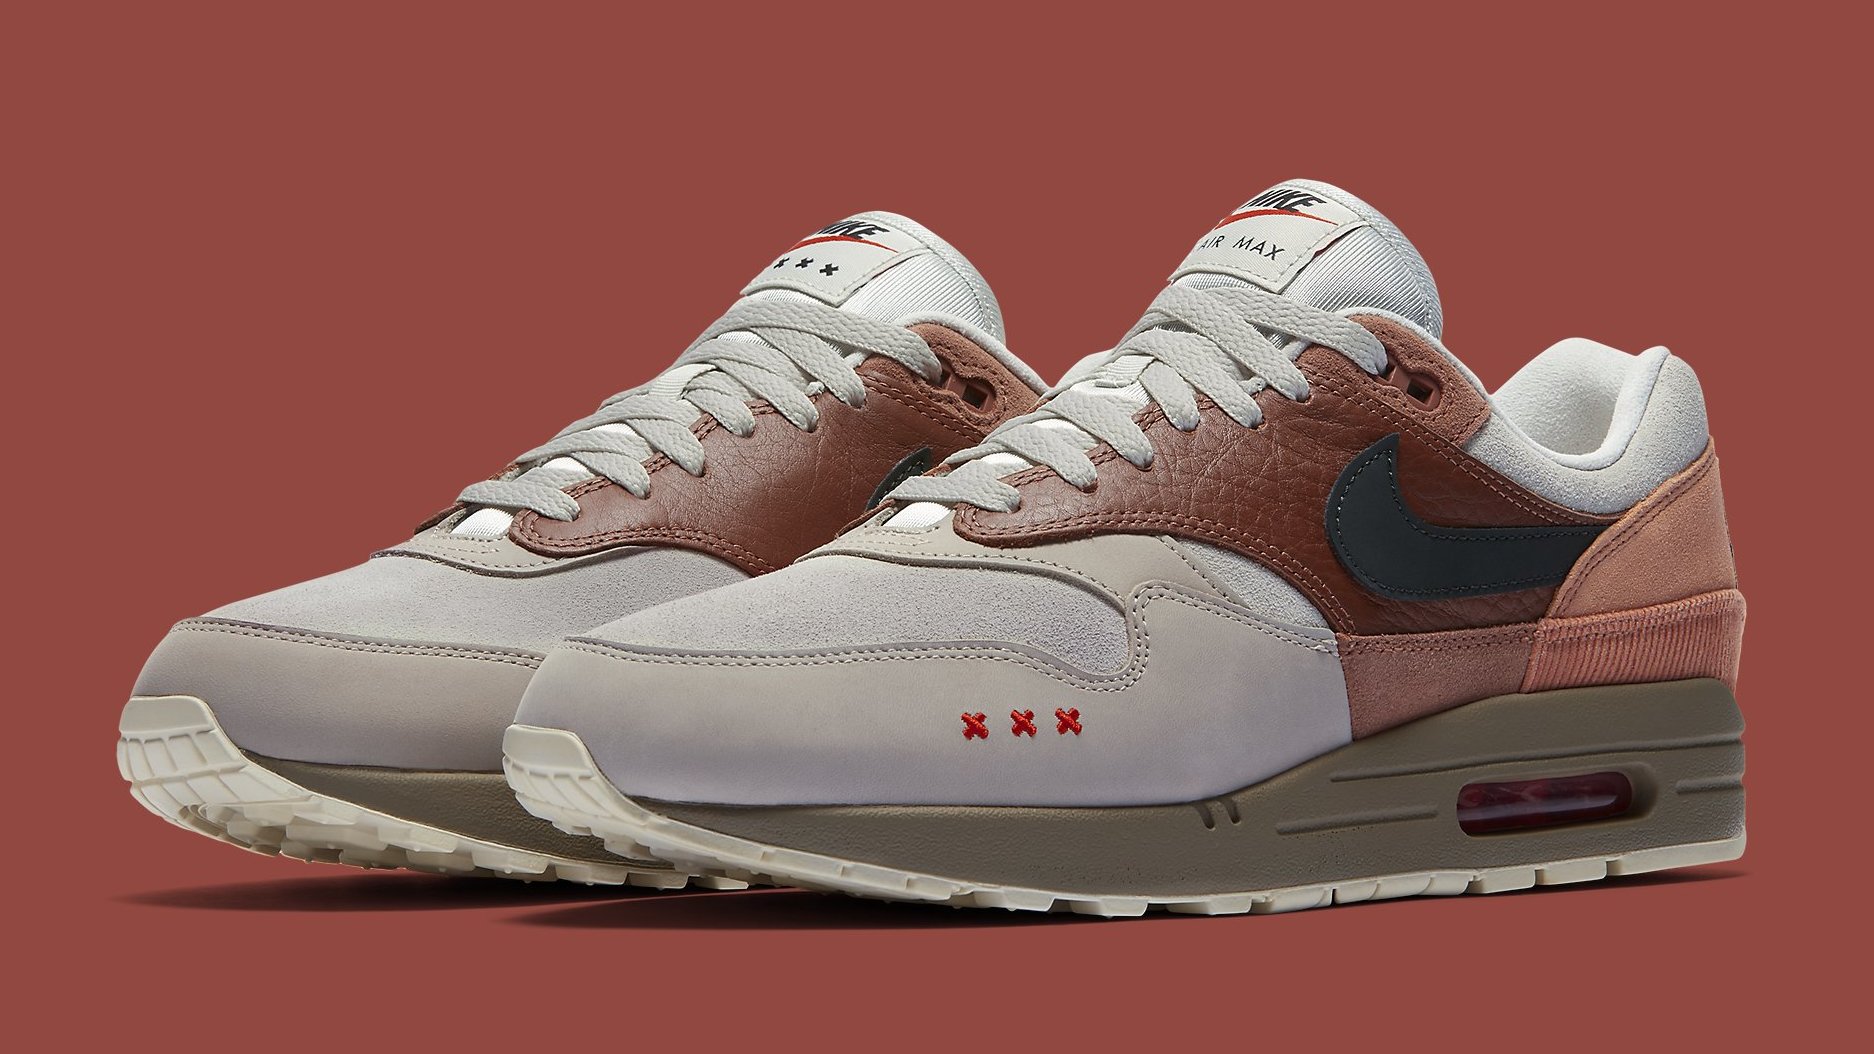 ik heb honger Drank Uitvoerder Amsterdam and London Are Celebrated in This Air Max 1 'City Pack' | Complex